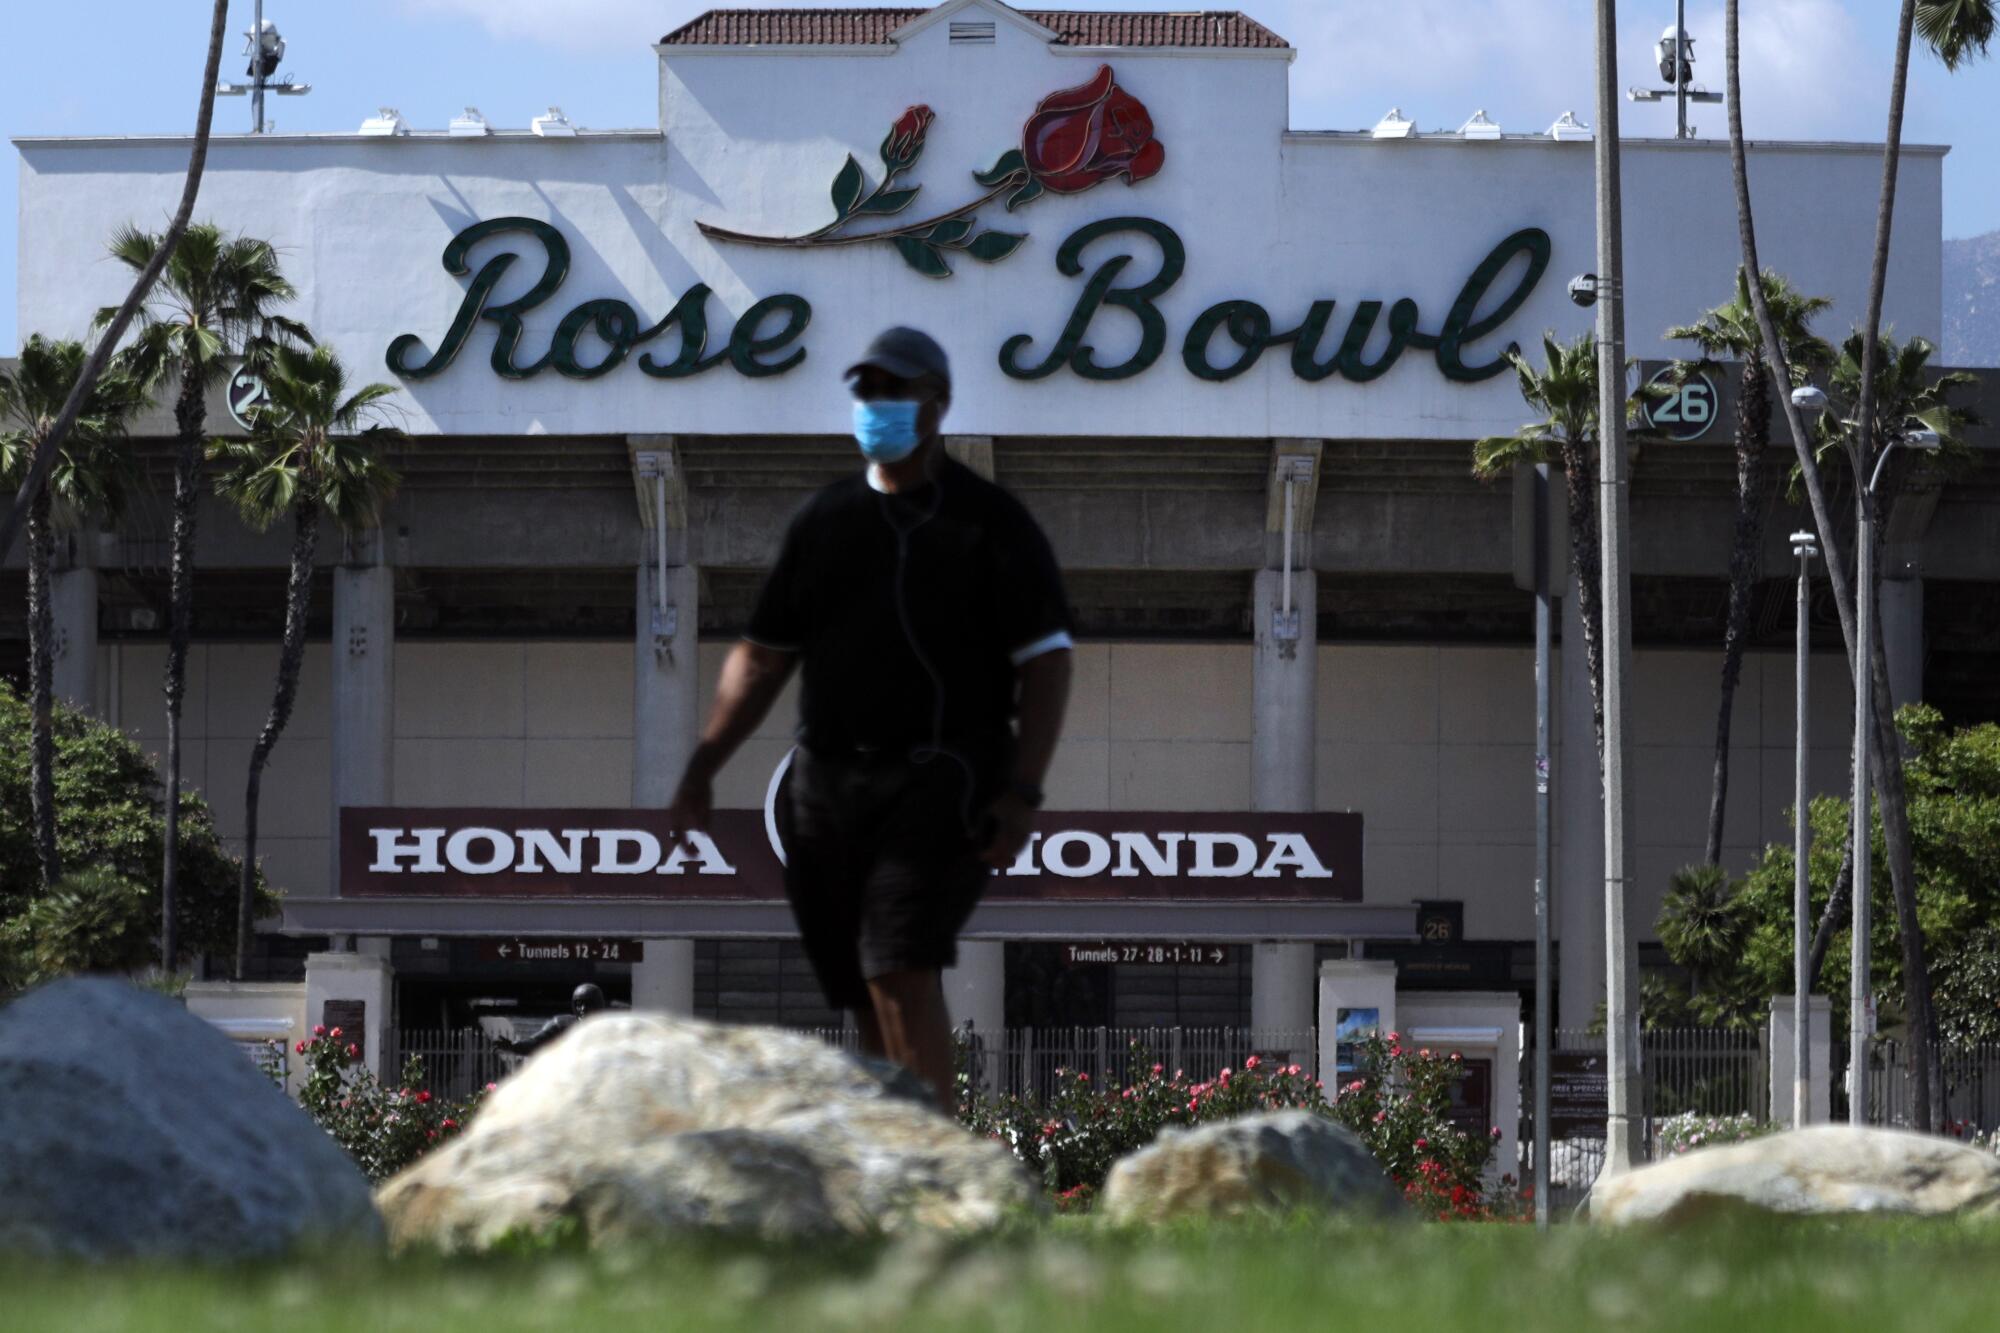 The Pasadena City Council opened the Rose Bowl Loop on Wednesday allowing visitors to enjoy the popular 3-mile trail around the Rose Bowl stadium.